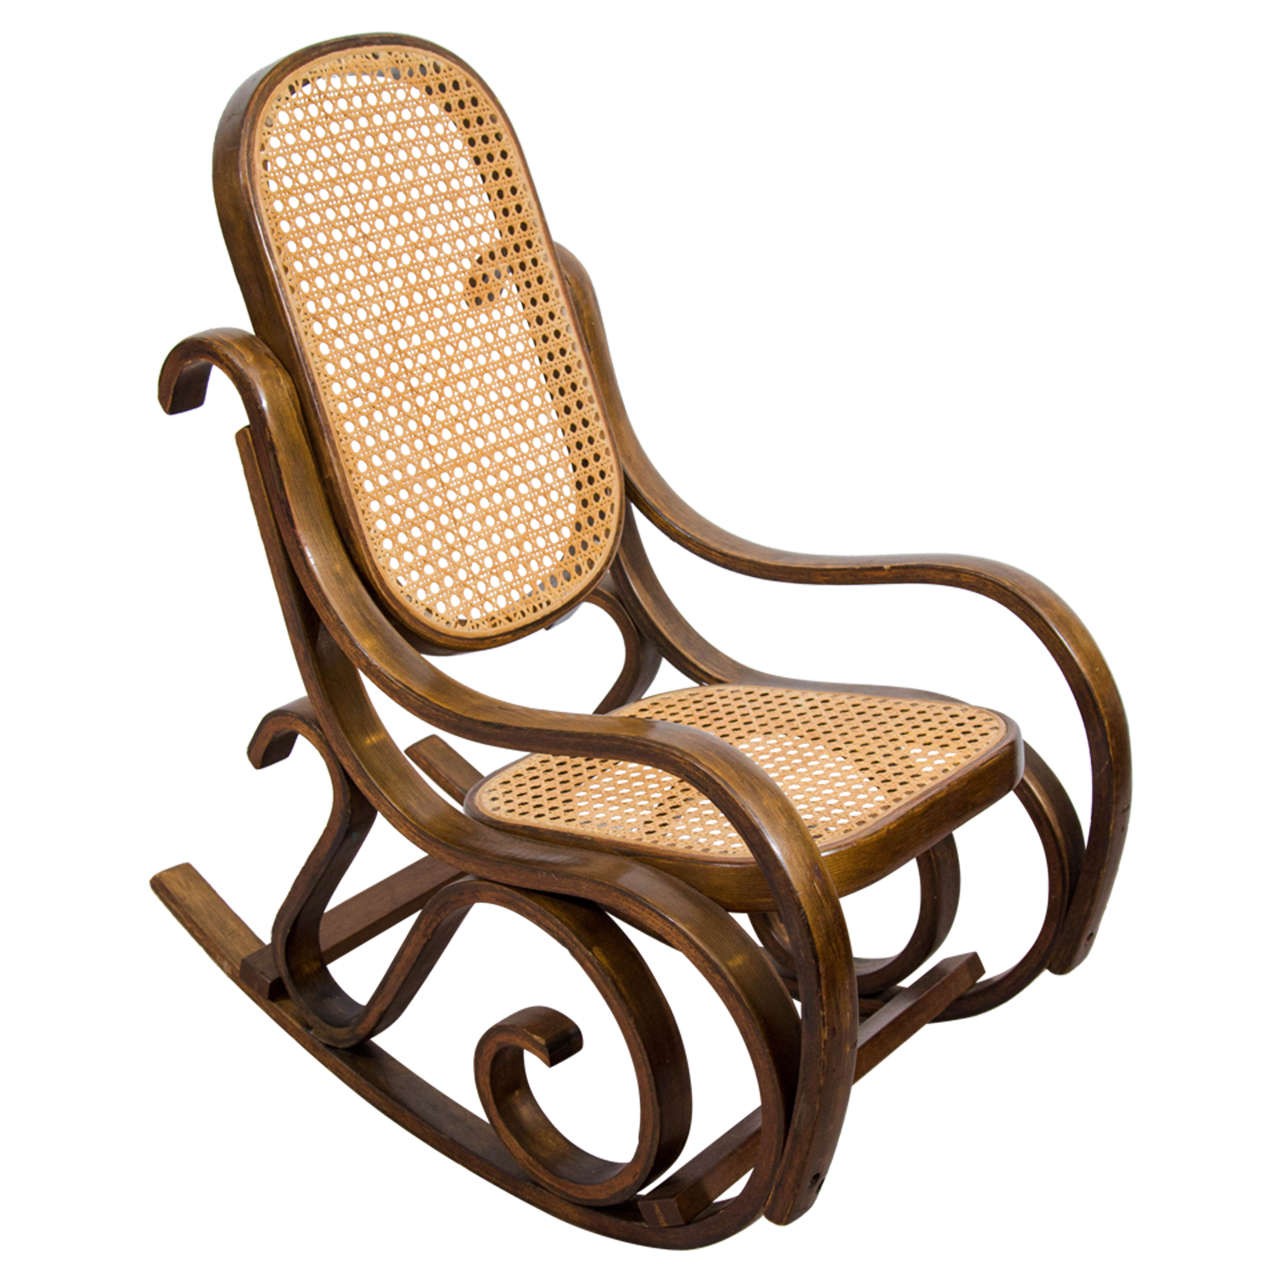 Midcentury childs bentwood rocking chair for sale at 1stdibs 2